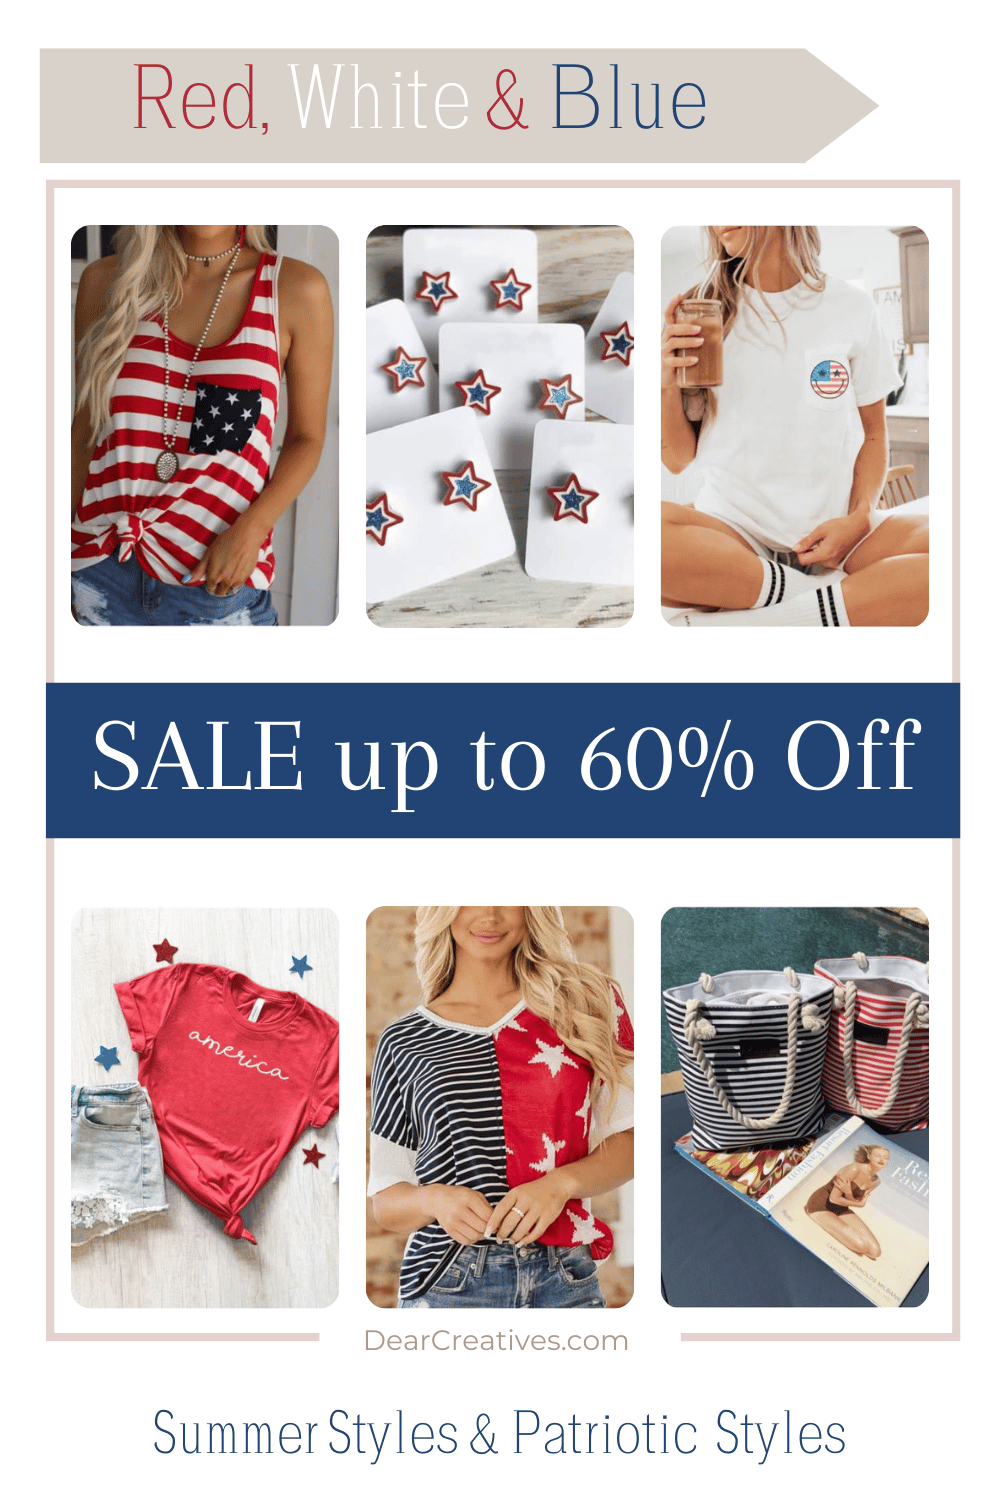 Summer Styles and Patriotic Styles Big - Shop This Jane's Sale + Bonus Savings! Find out more at DearCreatives.com